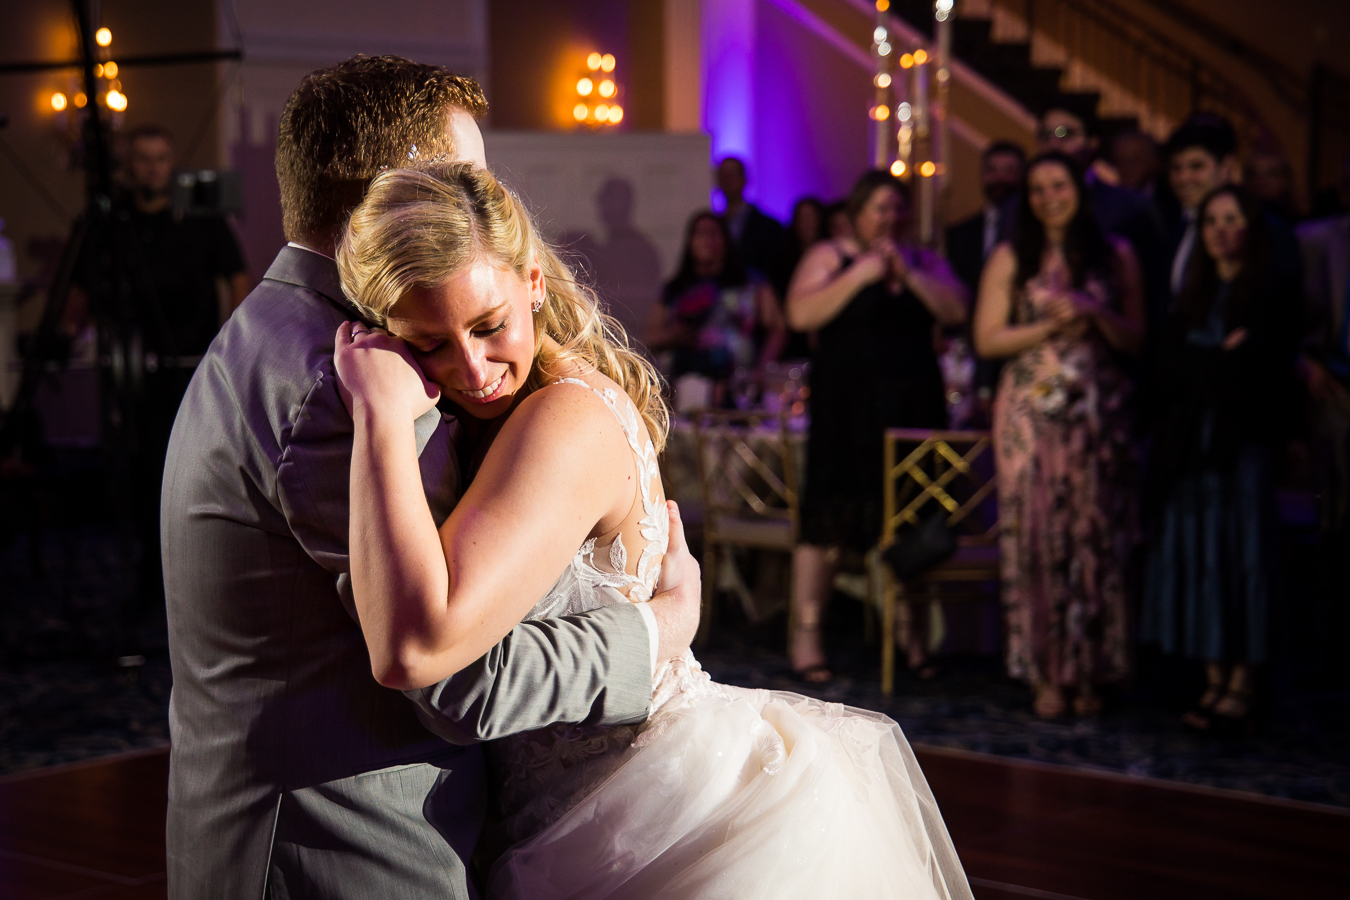 authentic wedding photographer, lisa rhinehart, captures this candid, authentic moment of the bride and groom holding each other close as they share their first dance together during their wedding reception at the palace at somerset park 